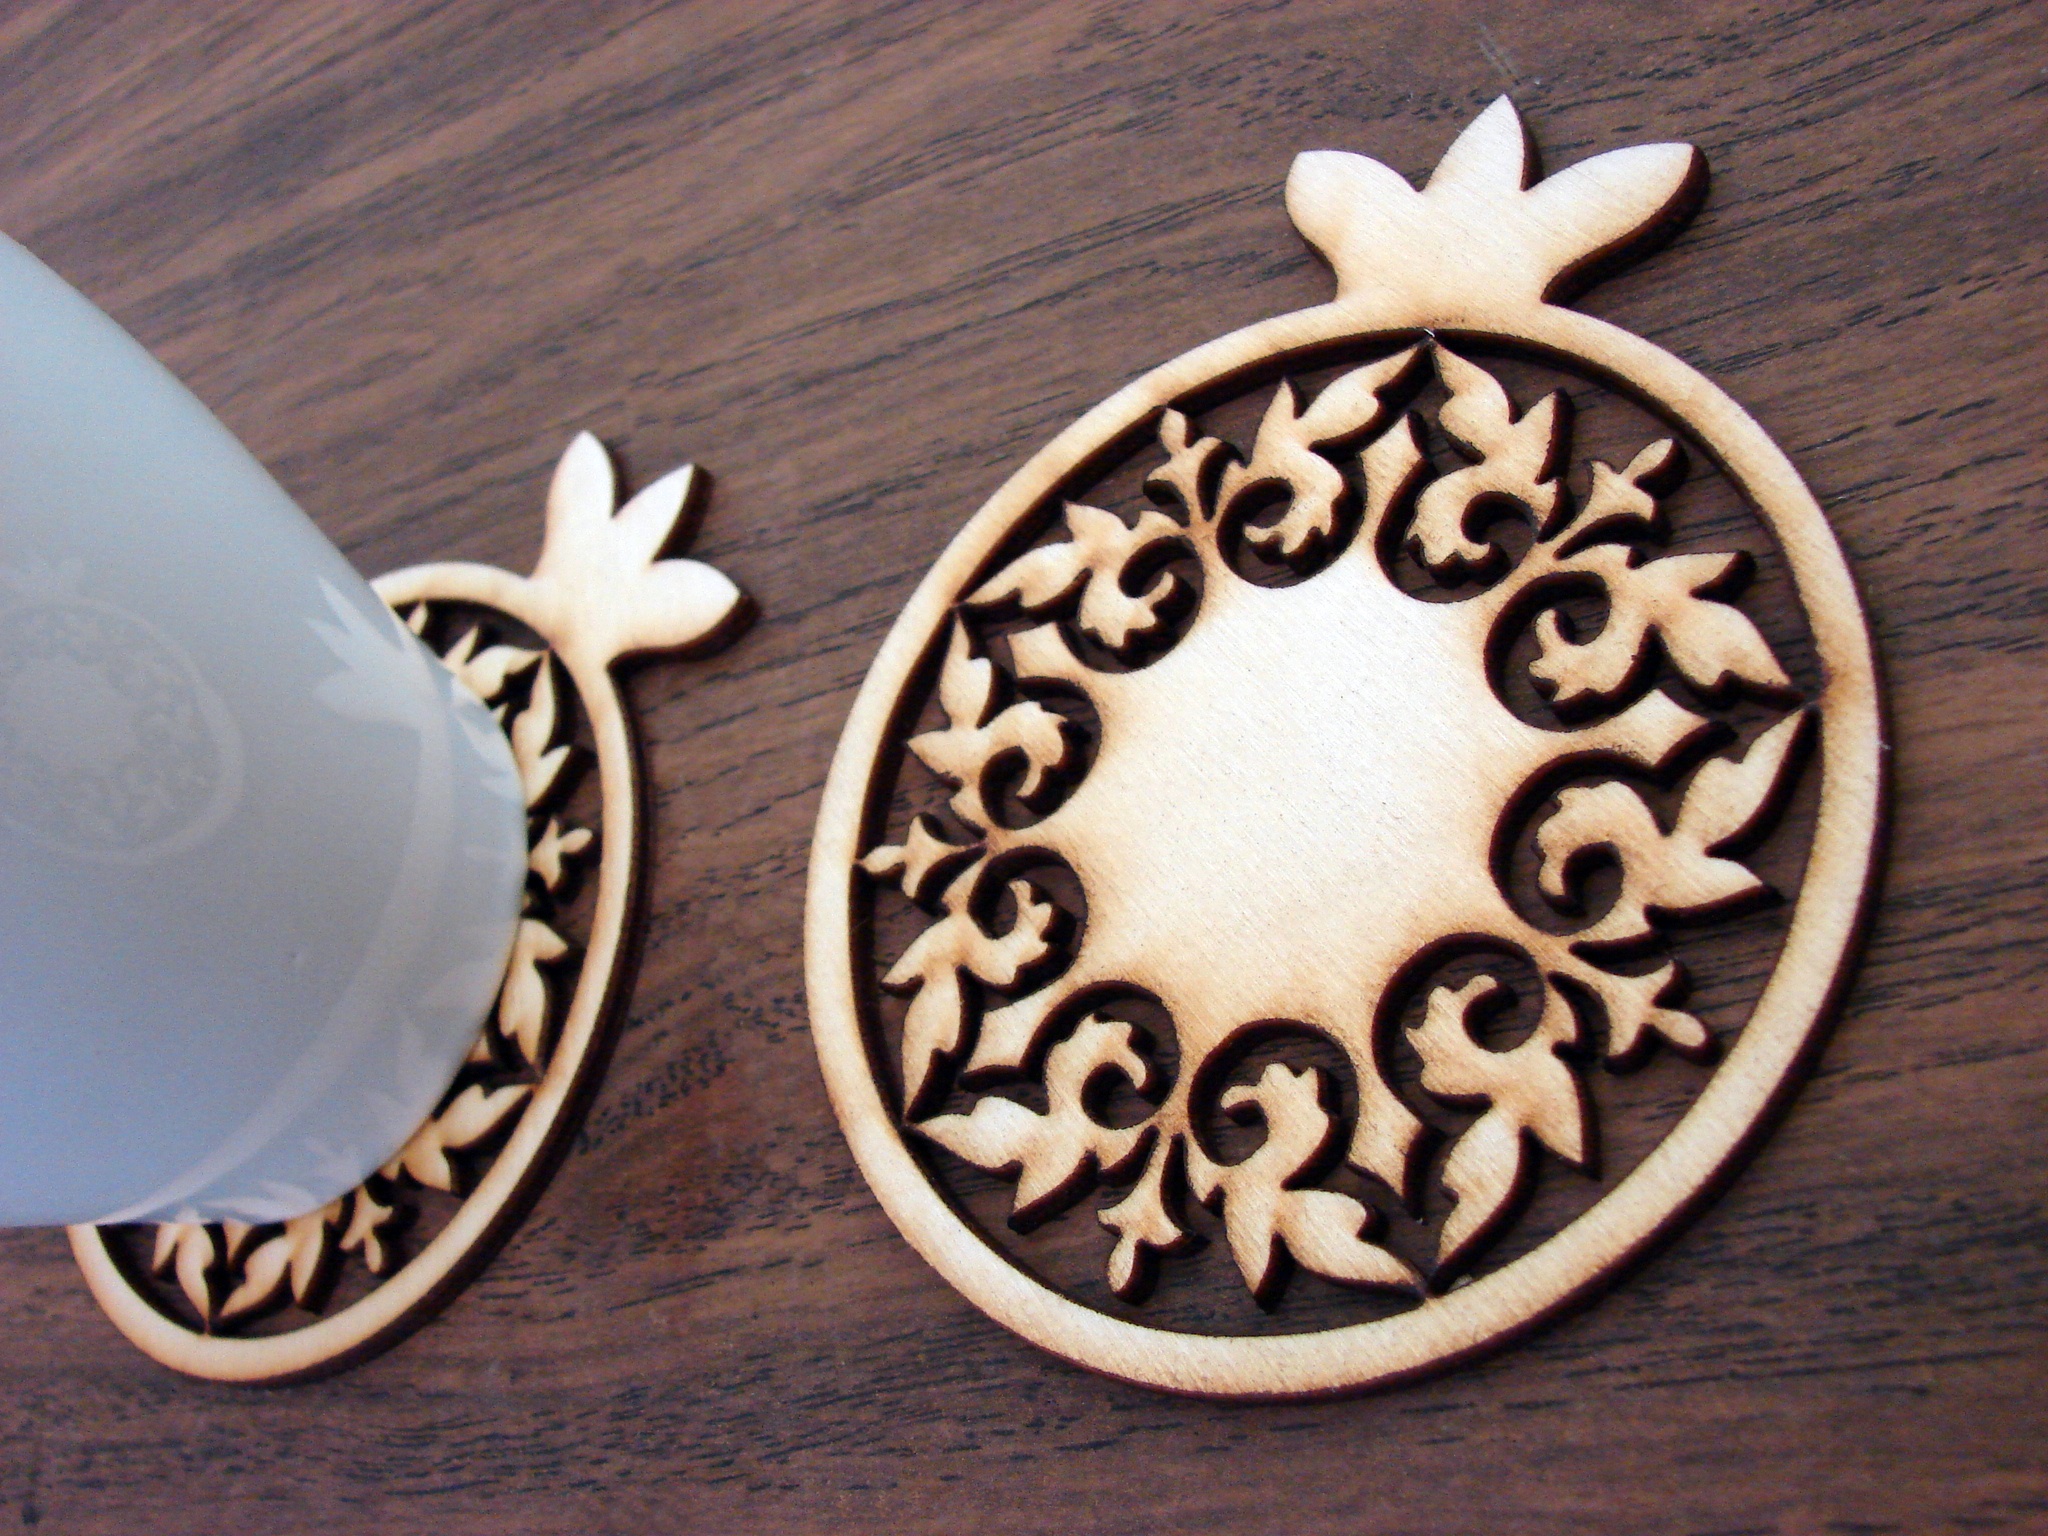 Button-Shaped Wooden Coasters : Wooden Drink Coaster